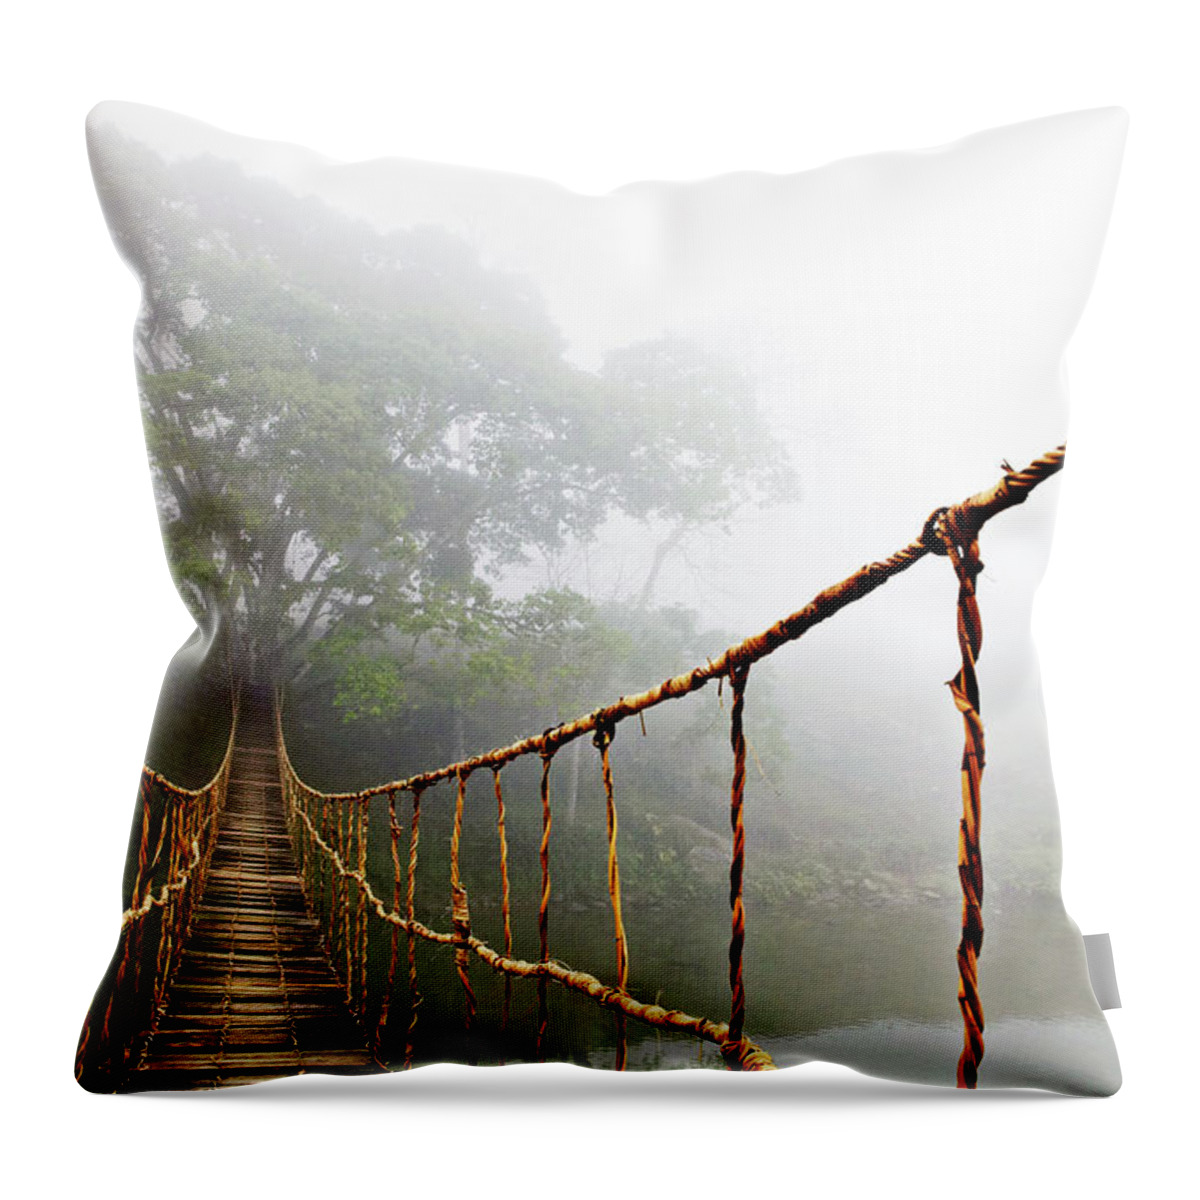 #faatoppicks Throw Pillow featuring the photograph Long Rope Bridge by Skip Nall